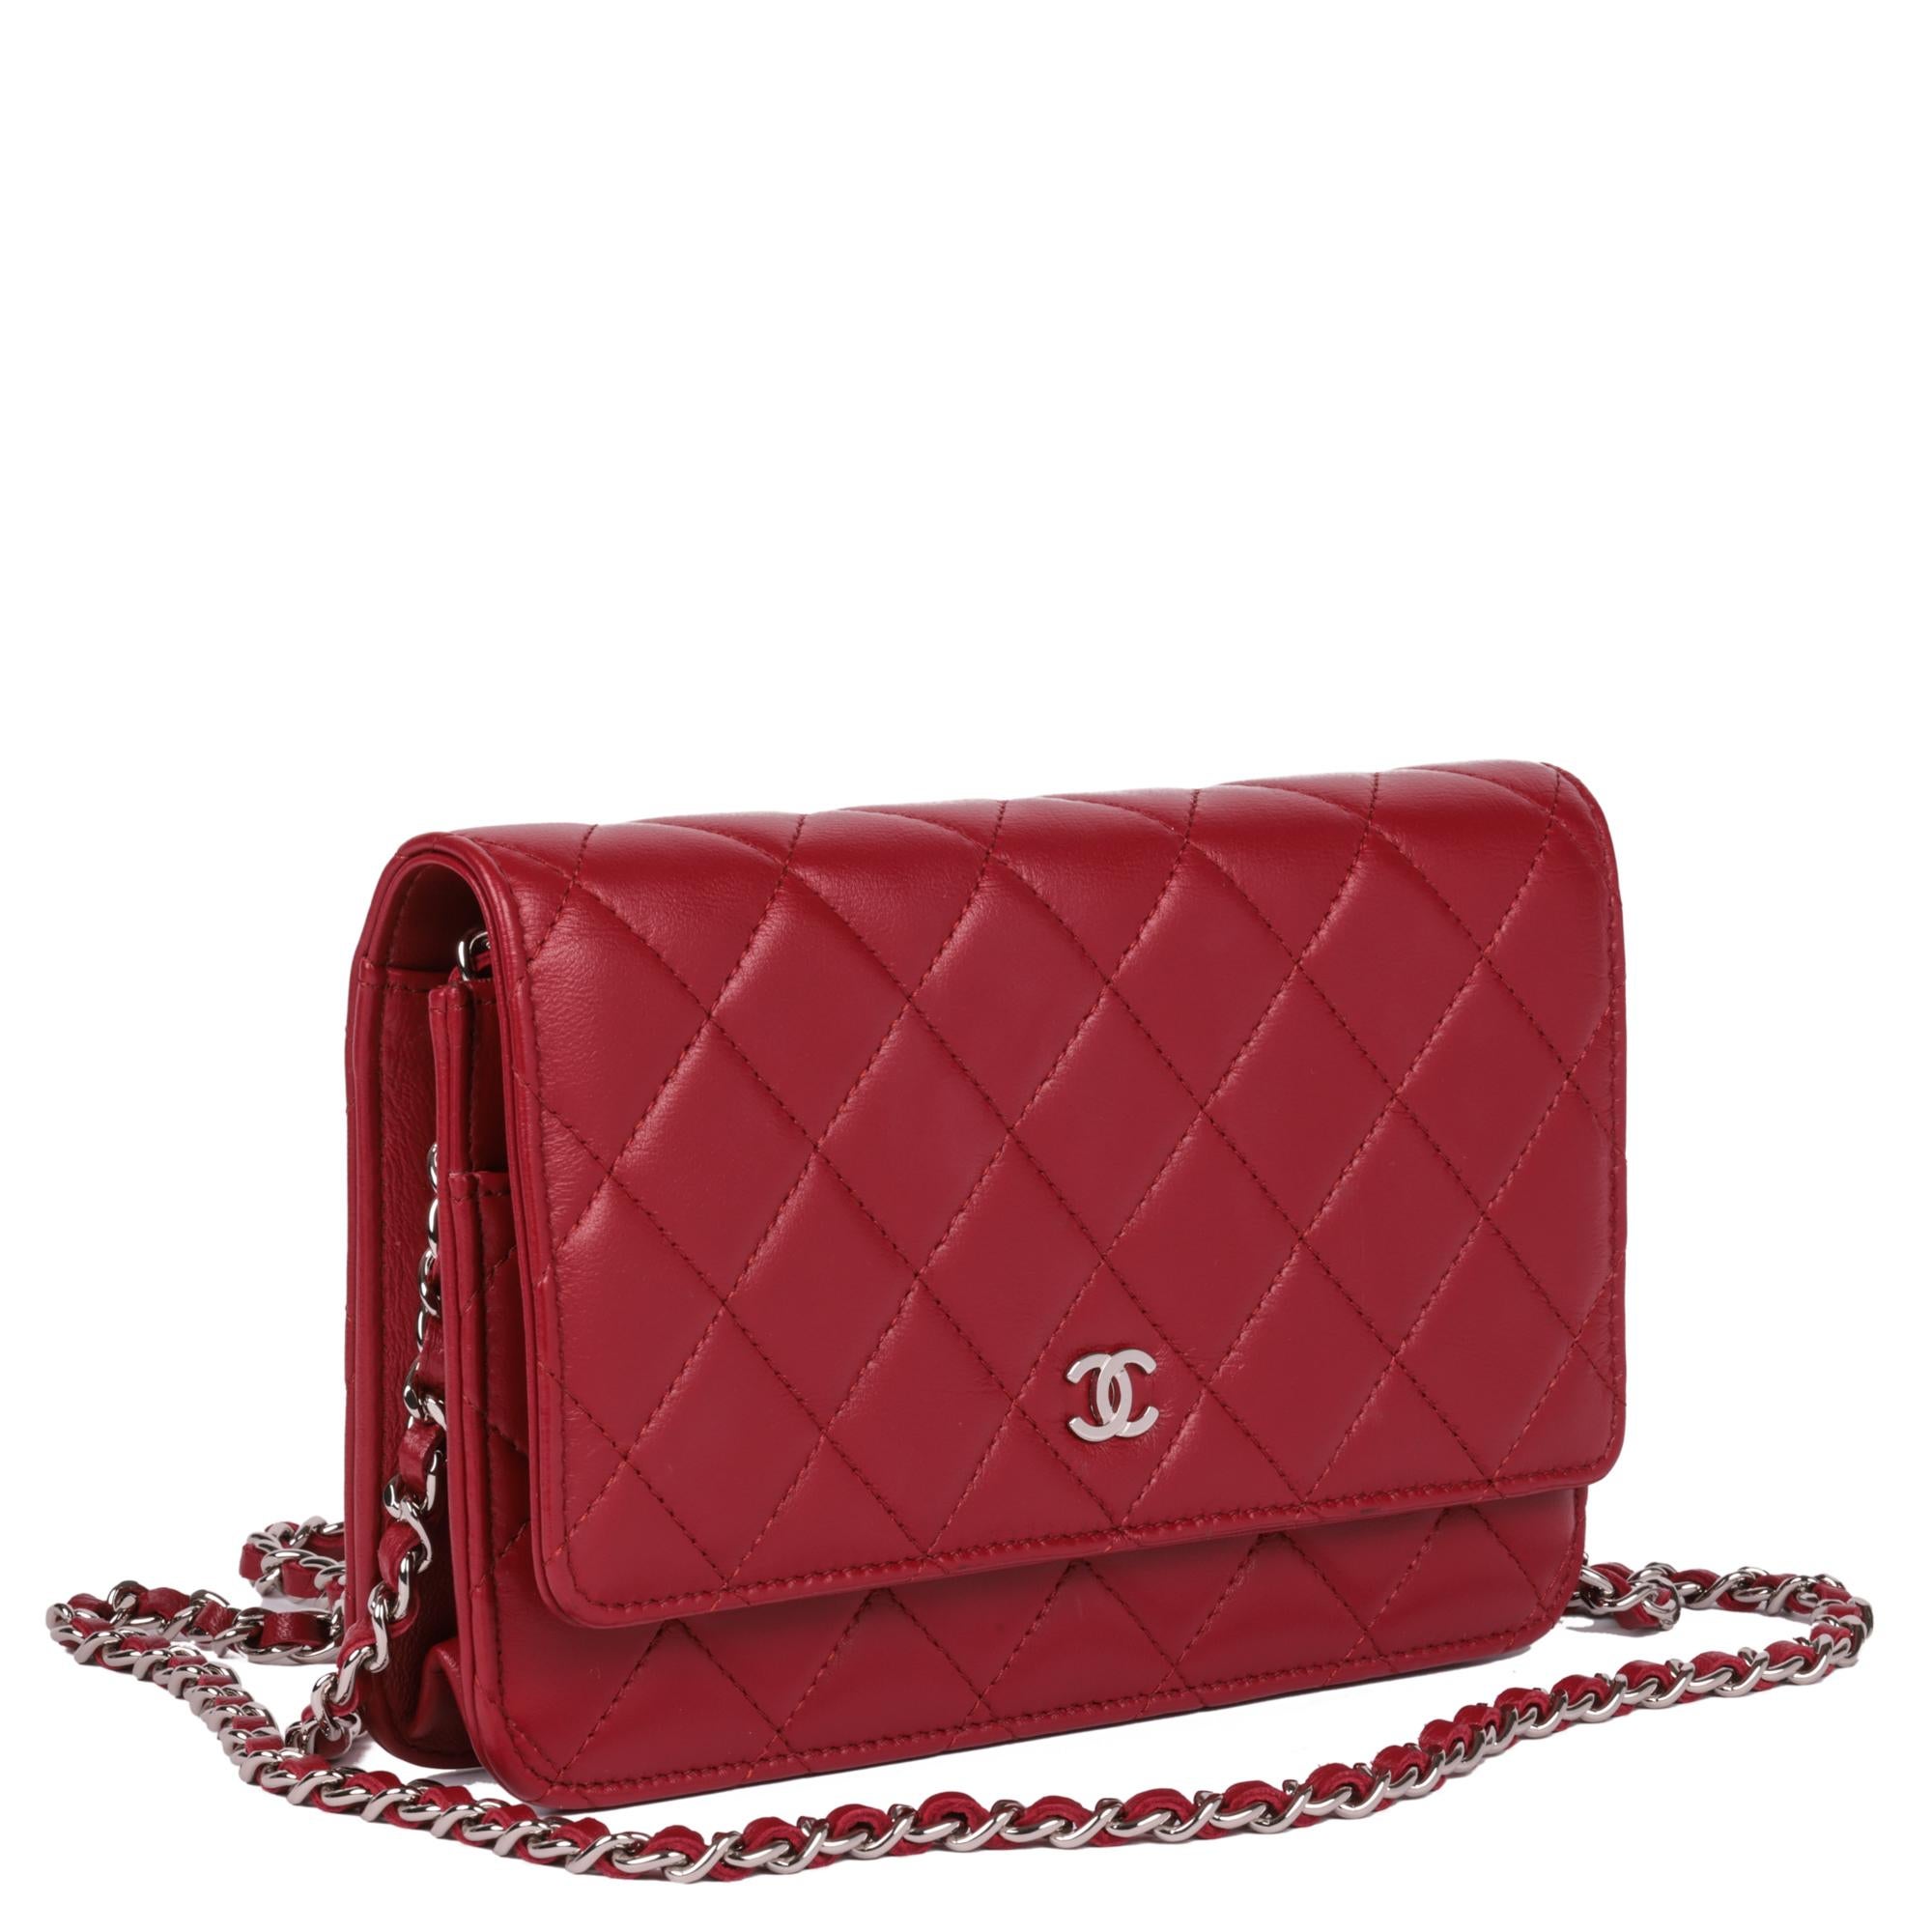 CHANEL
Red Quilted Lambskin Leather Wallet-on-Chain WOC

Serial Number: 19307893
Age (Circa): 2014
Accompanied By: Chanel Dust Bag, Box, Authenticity Card, Care Booklet
Authenticity Details:  Authenticity Card, Serial Sticker (Made in Italy)
Gender: